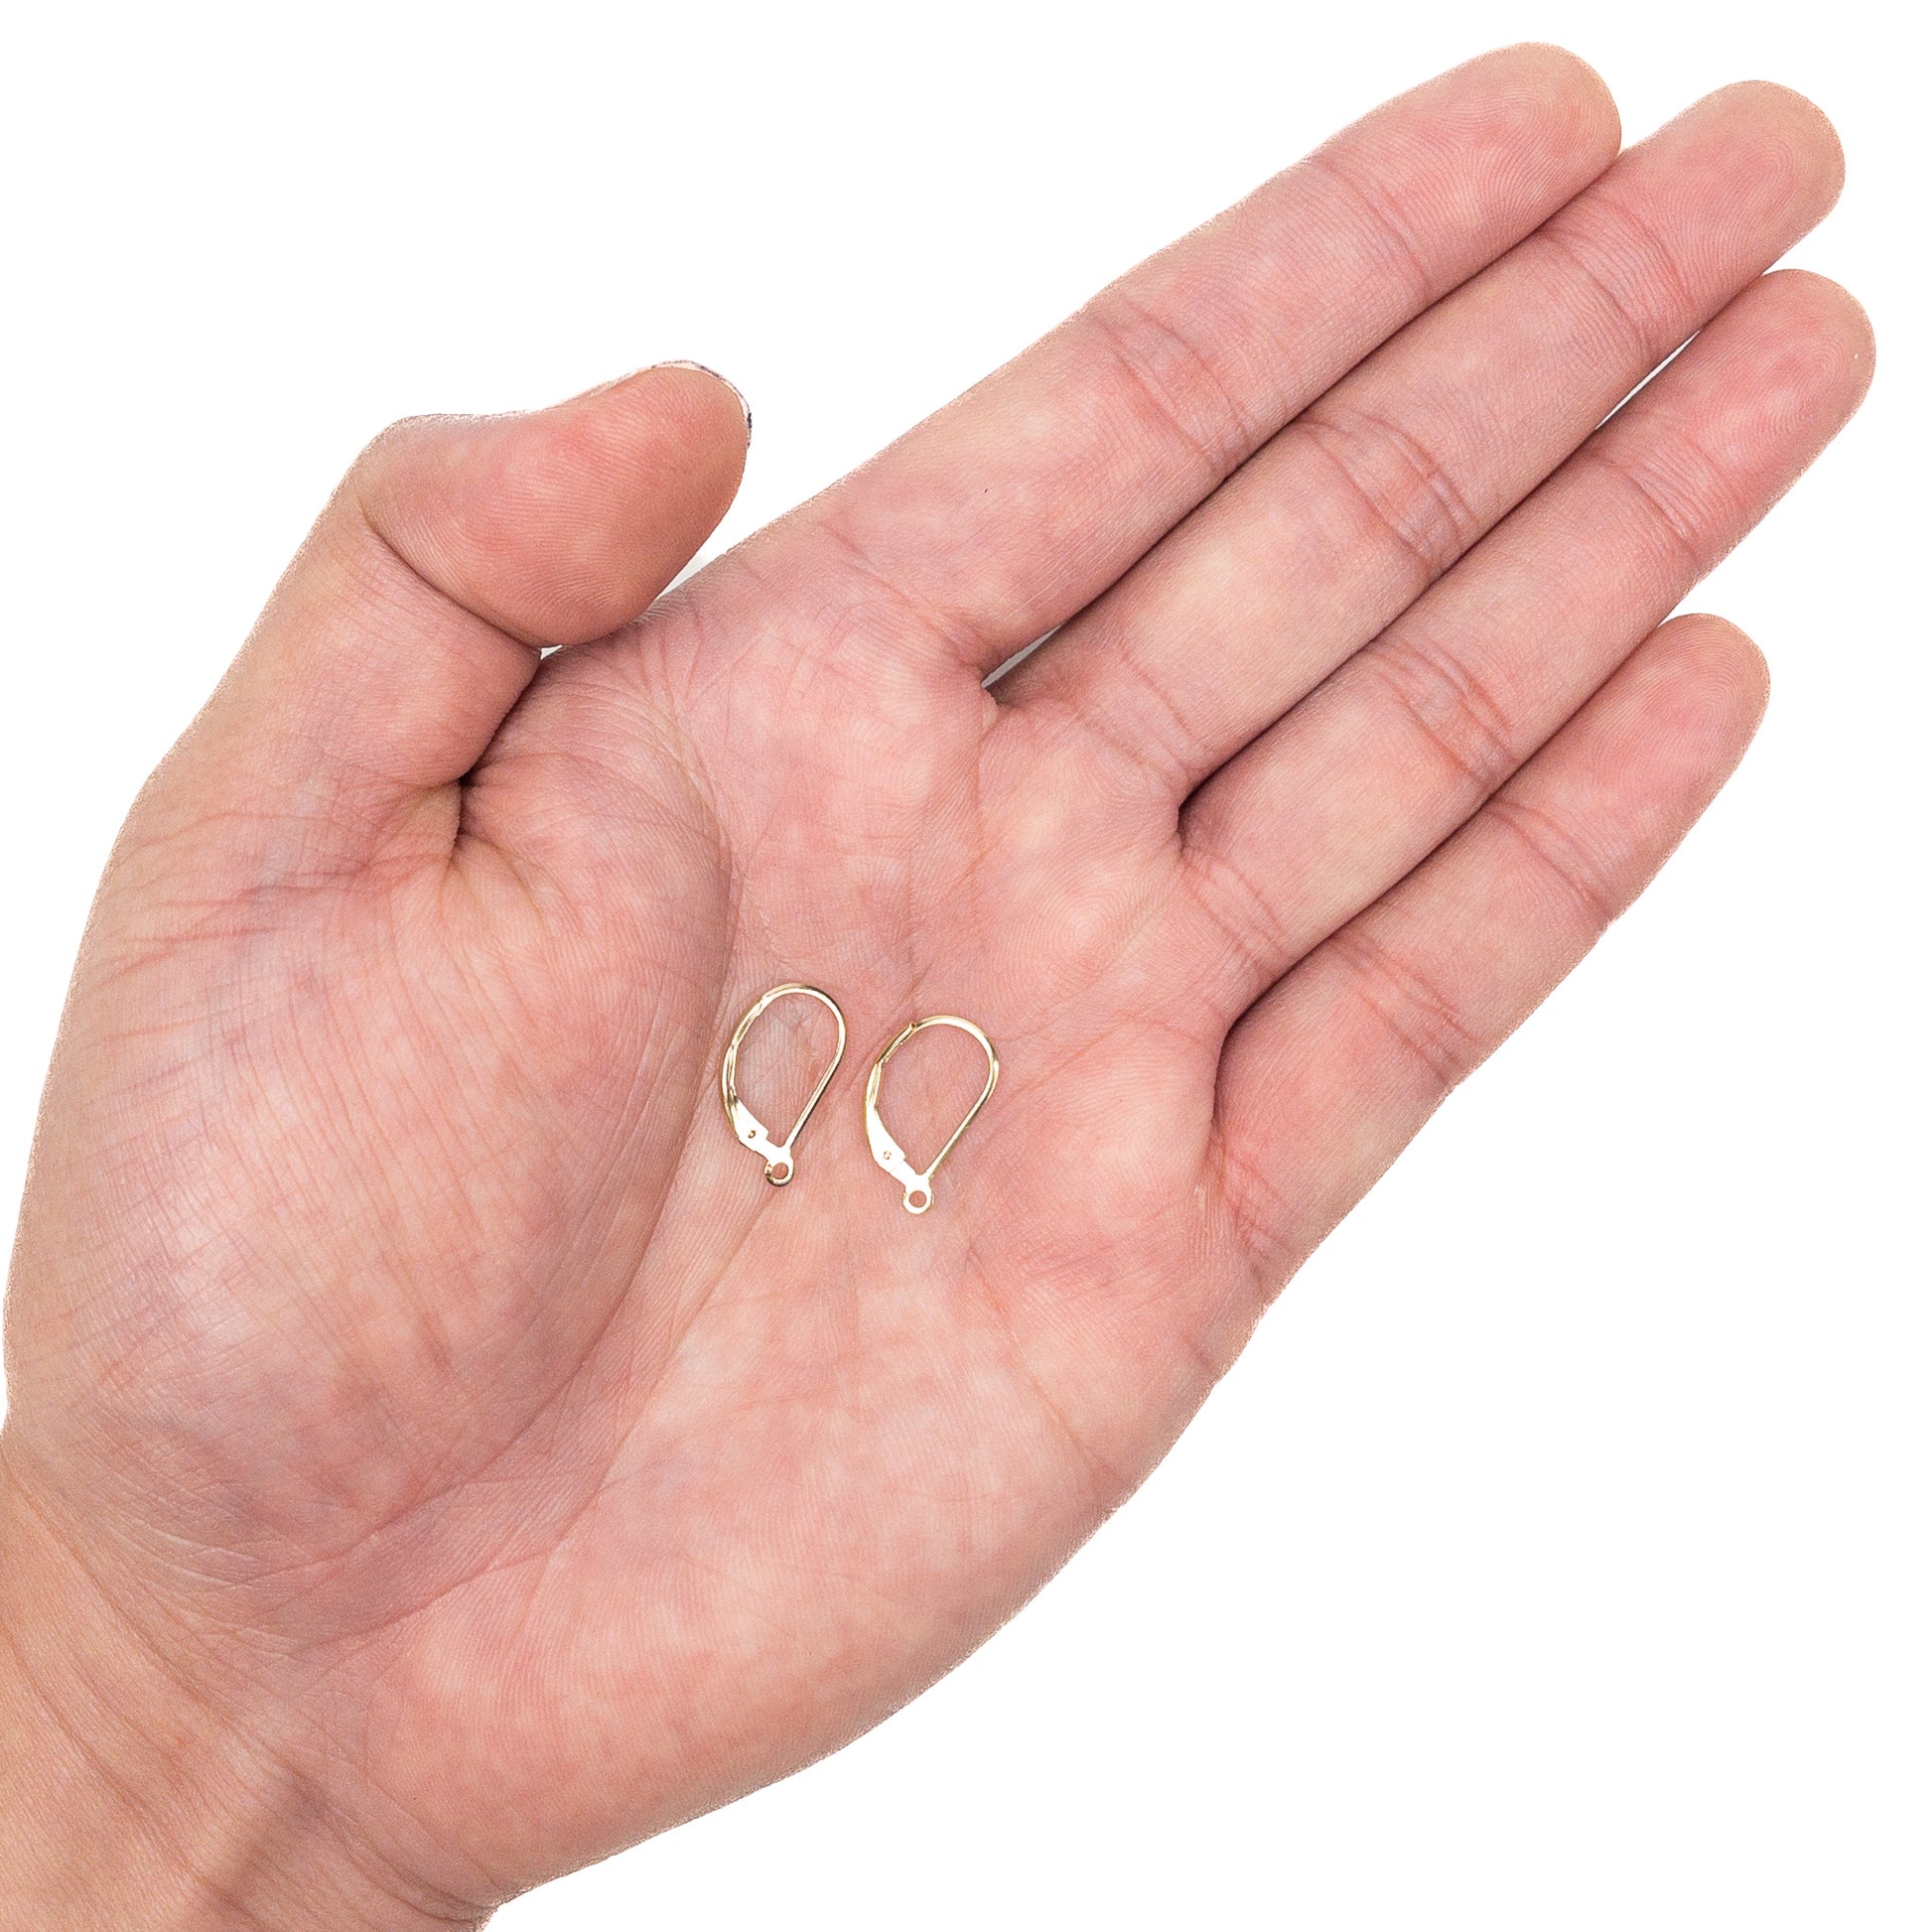 Simple Leverback Earwire (3 Metal Options Available) - 1 pair